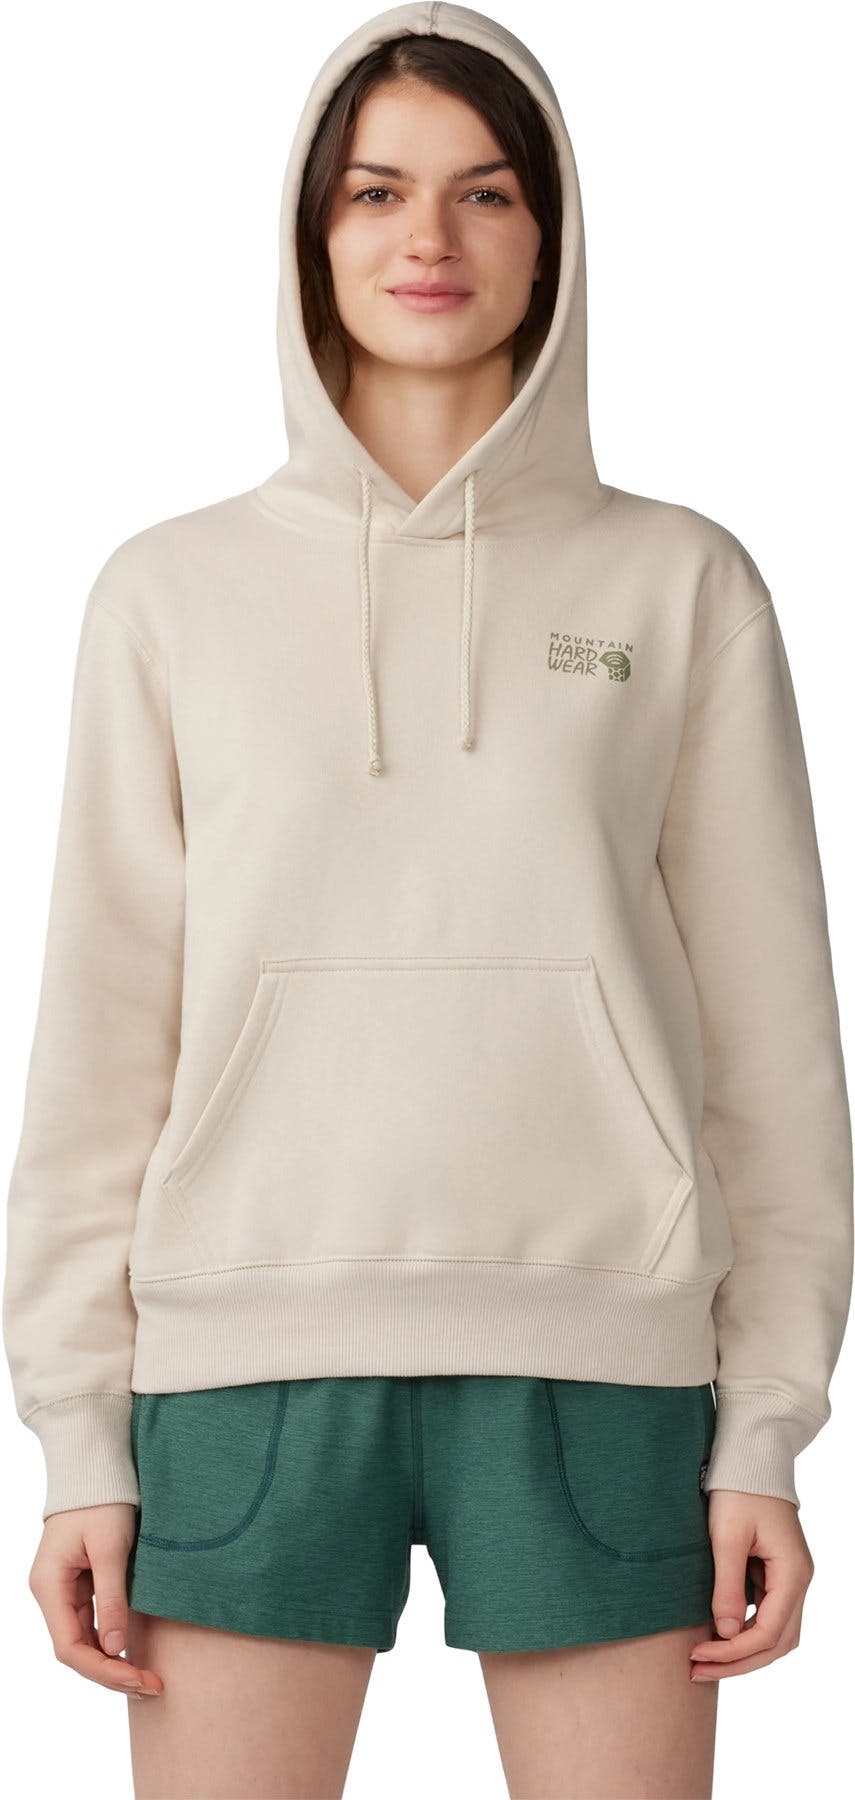 Product image for MHW Logo Pullover Hoody - Women's